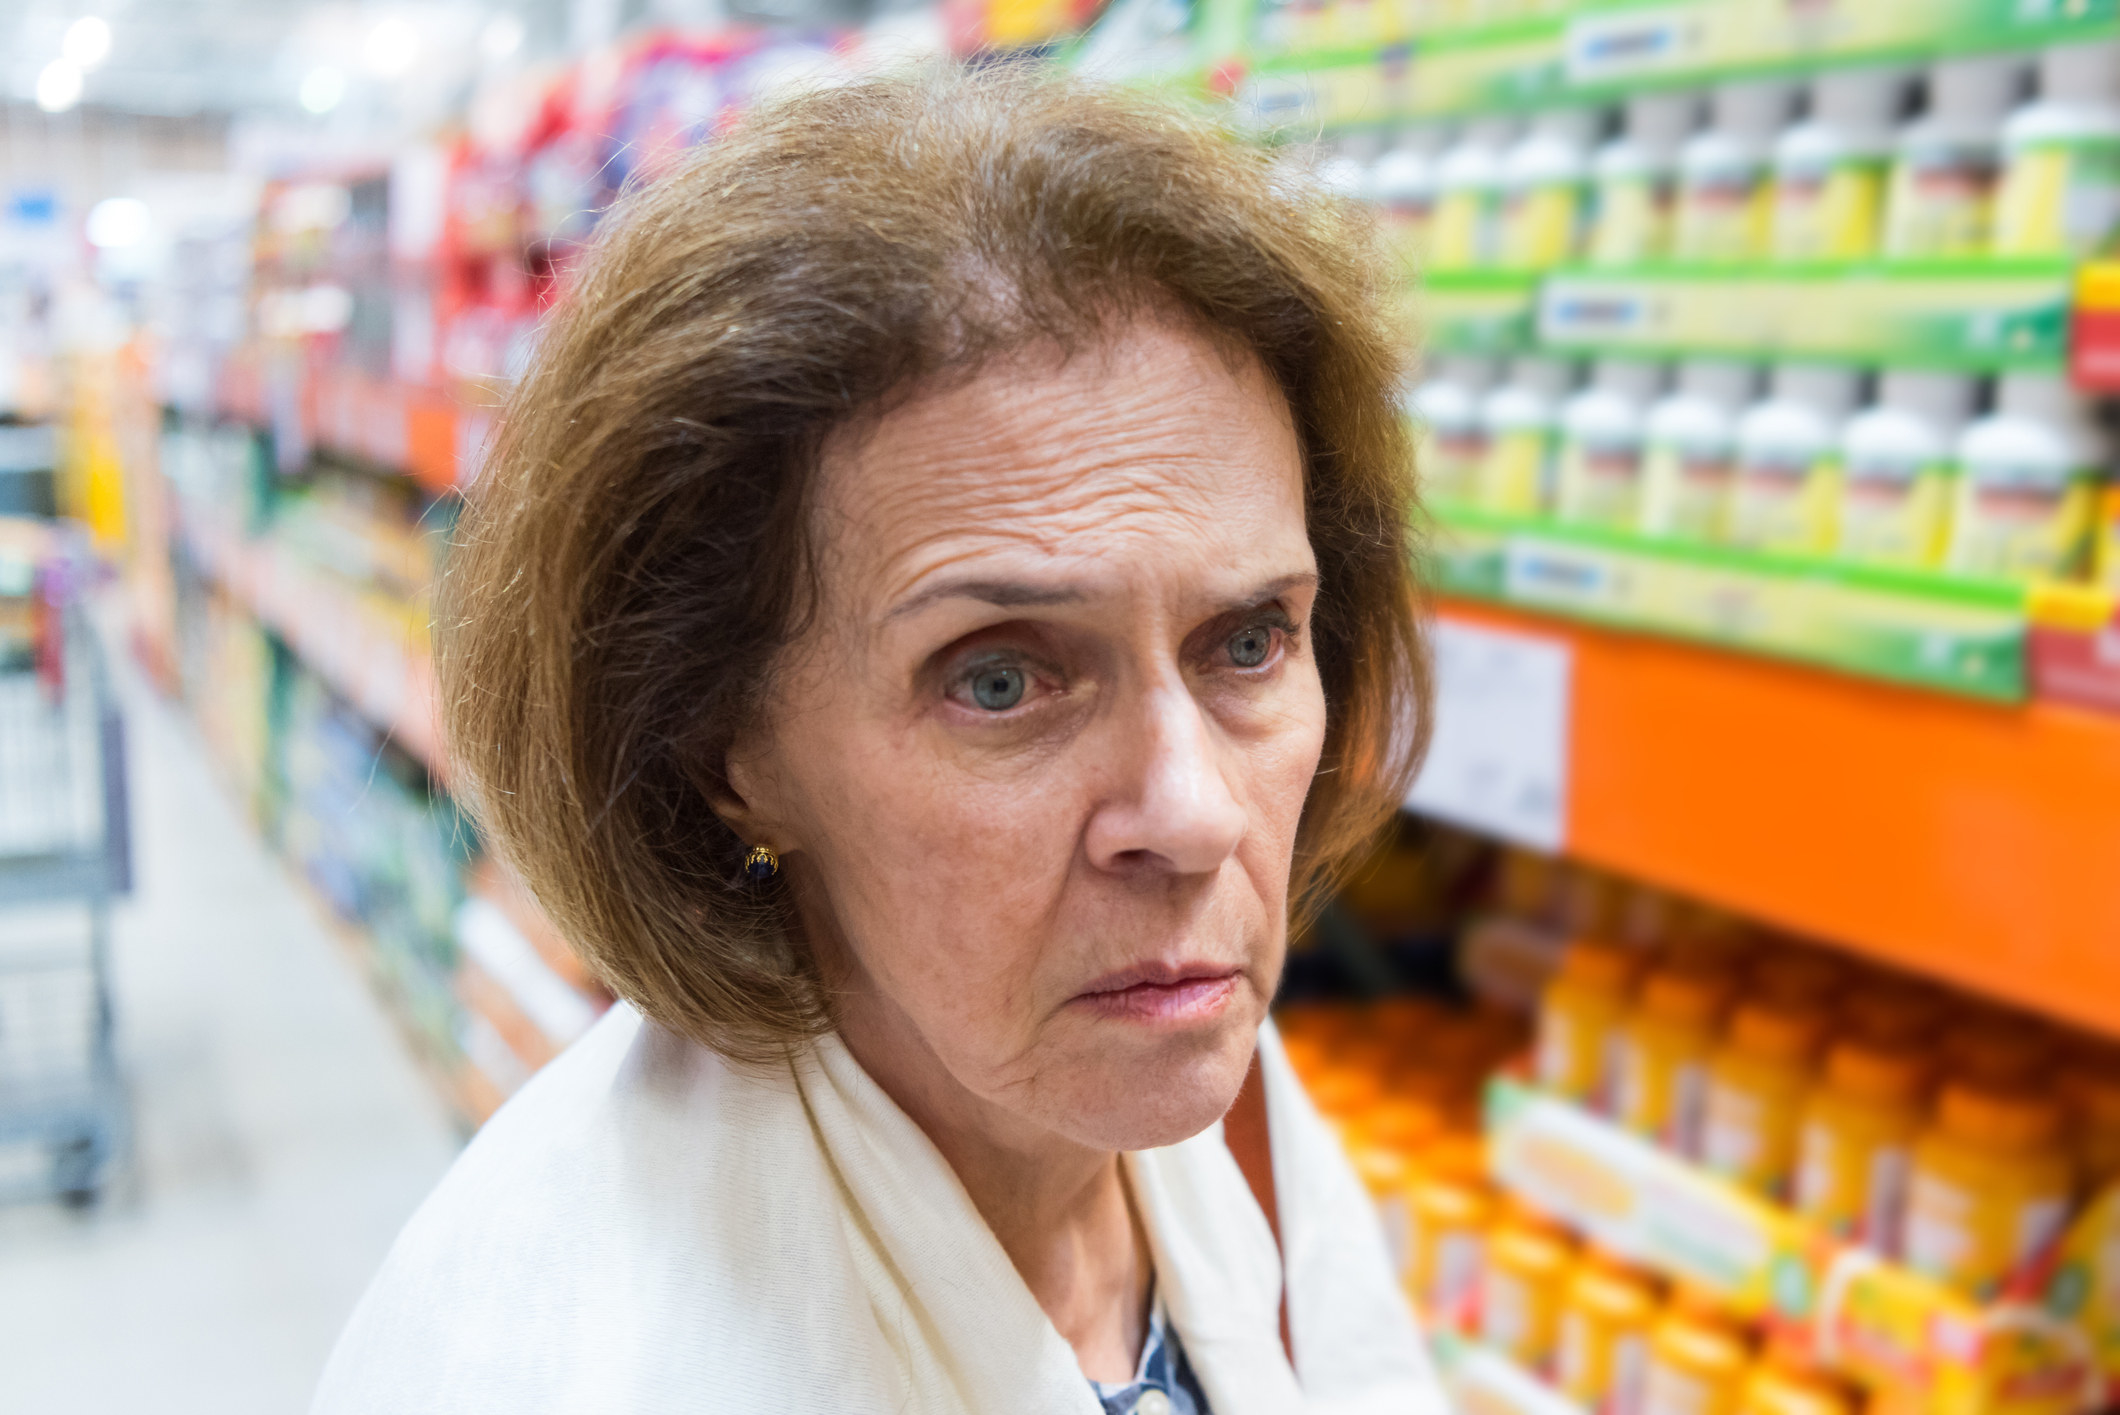 An older woman looking angry